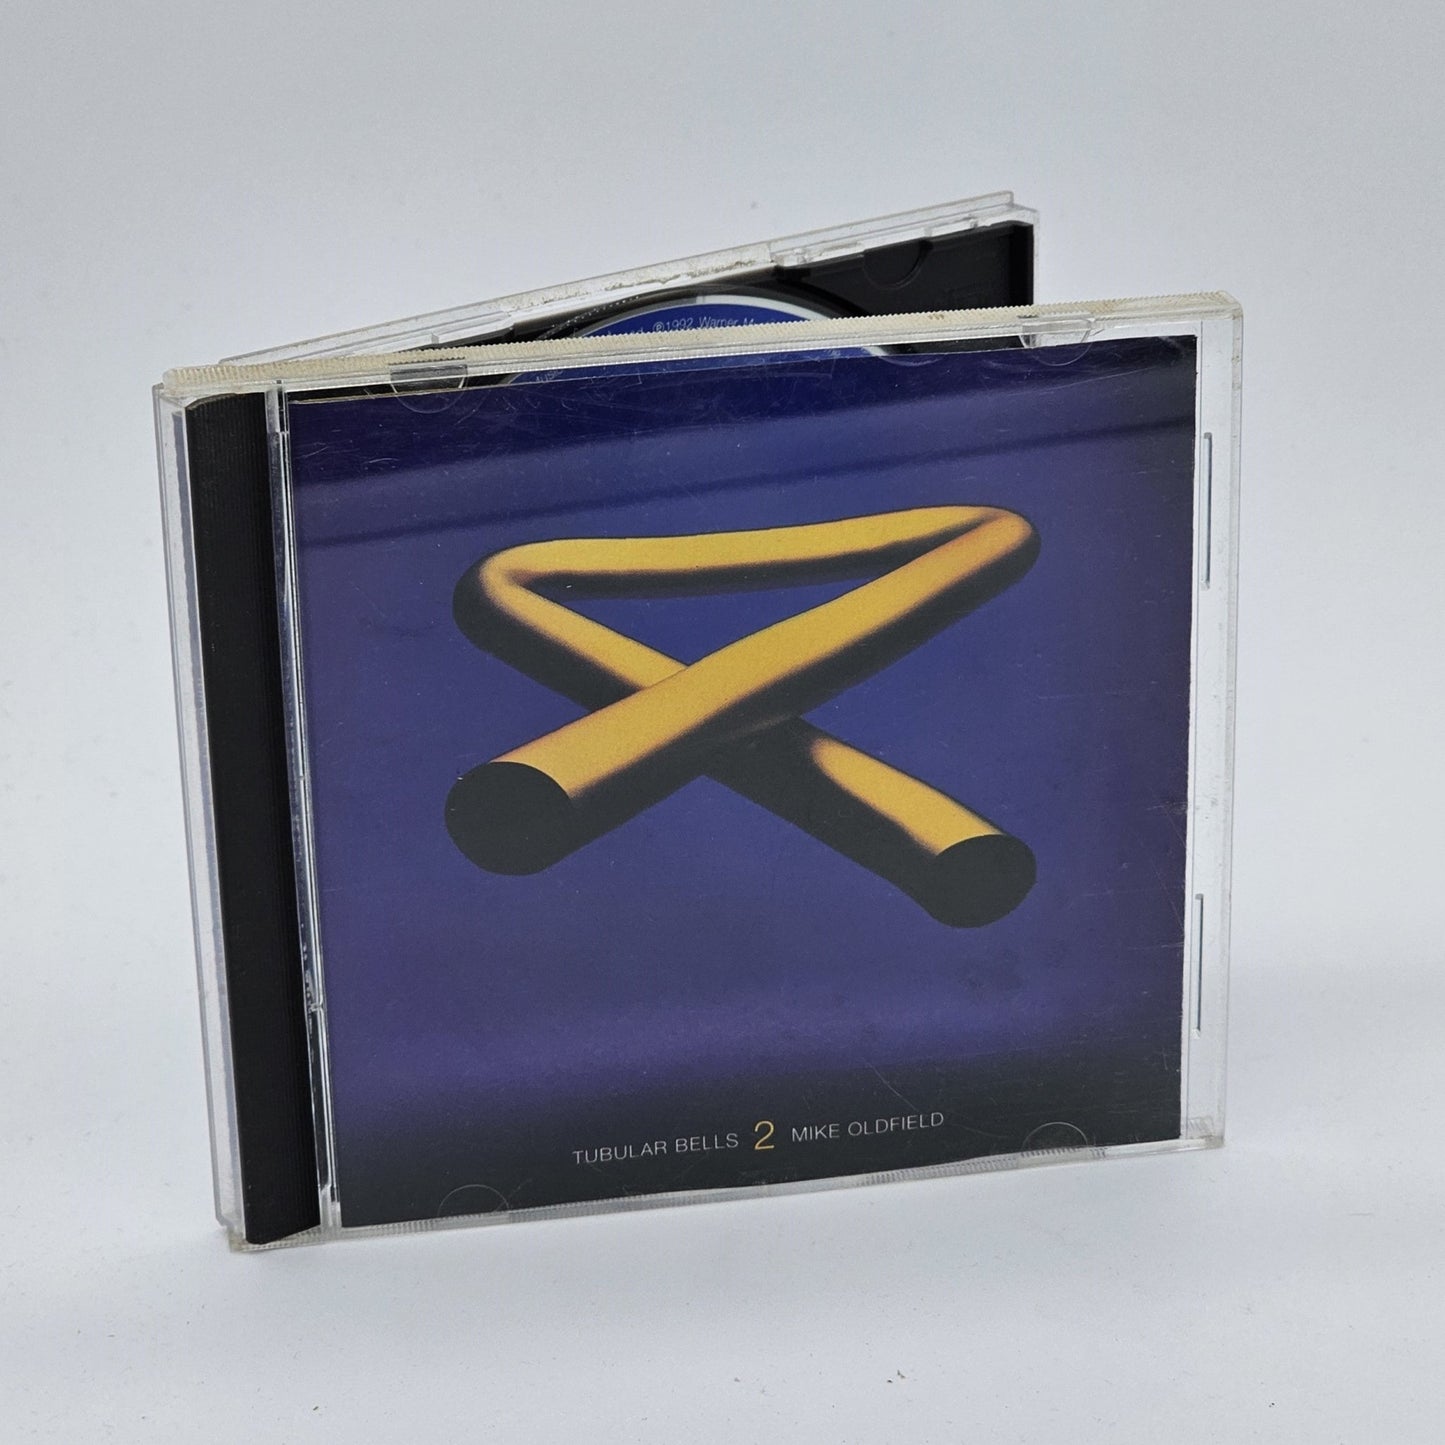 Reprise Records - Mike Oldfield | Tubular Bells 2 | CD - Compact Disc - Steady Bunny Shop